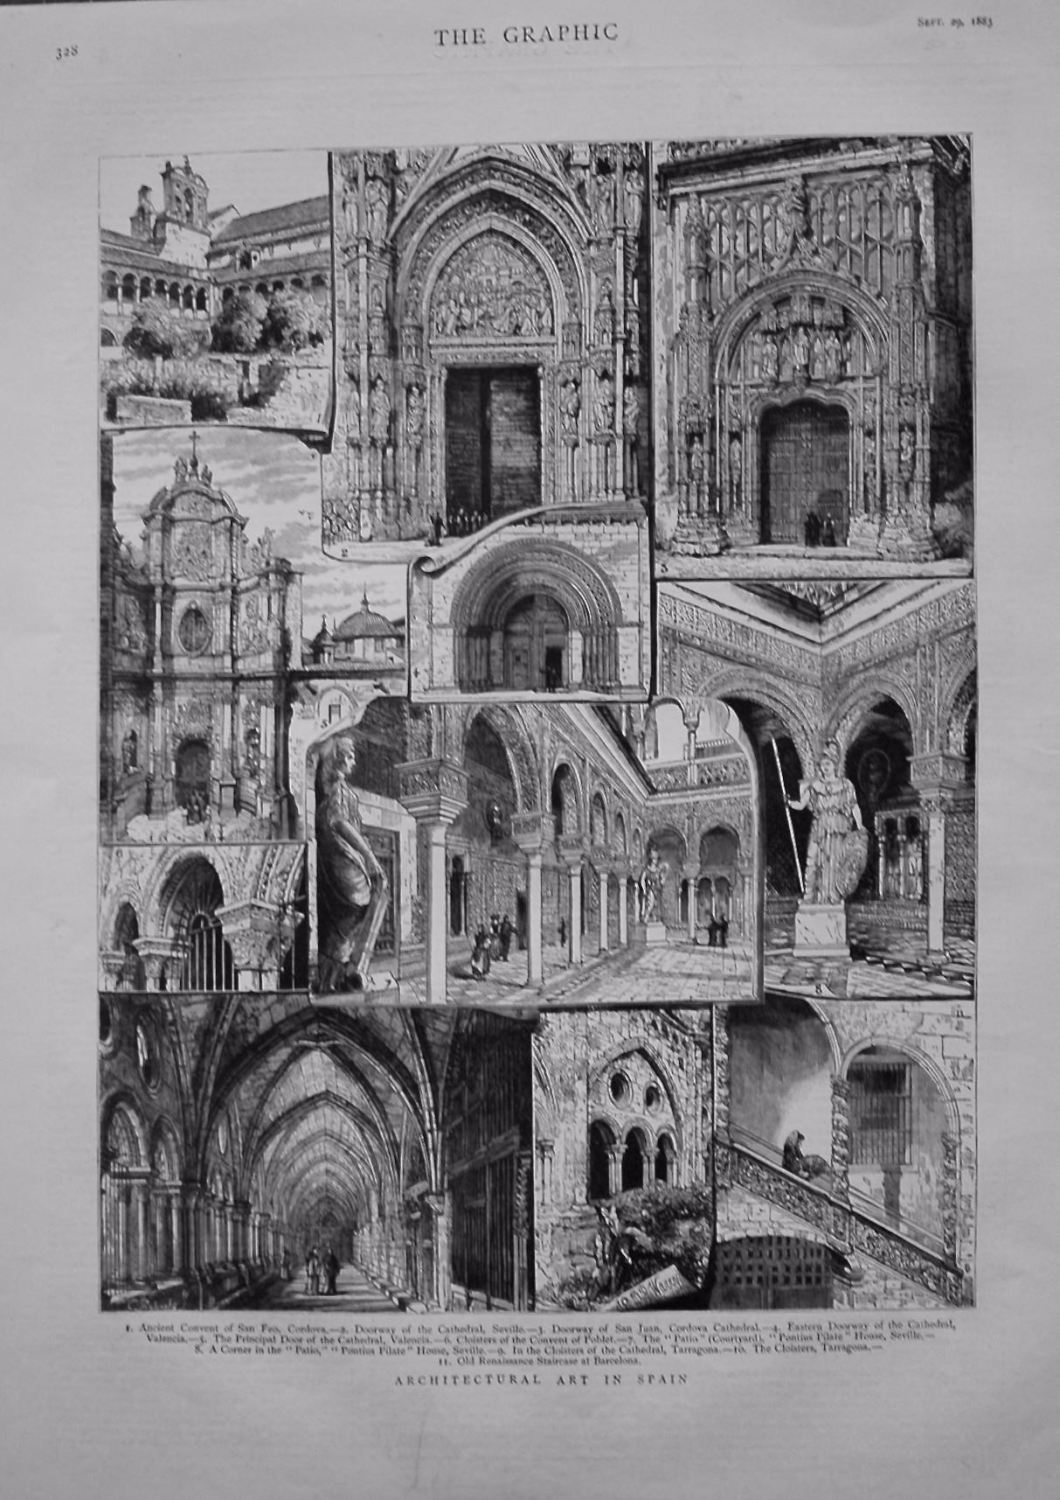 Architectural Art in Spain. 1883